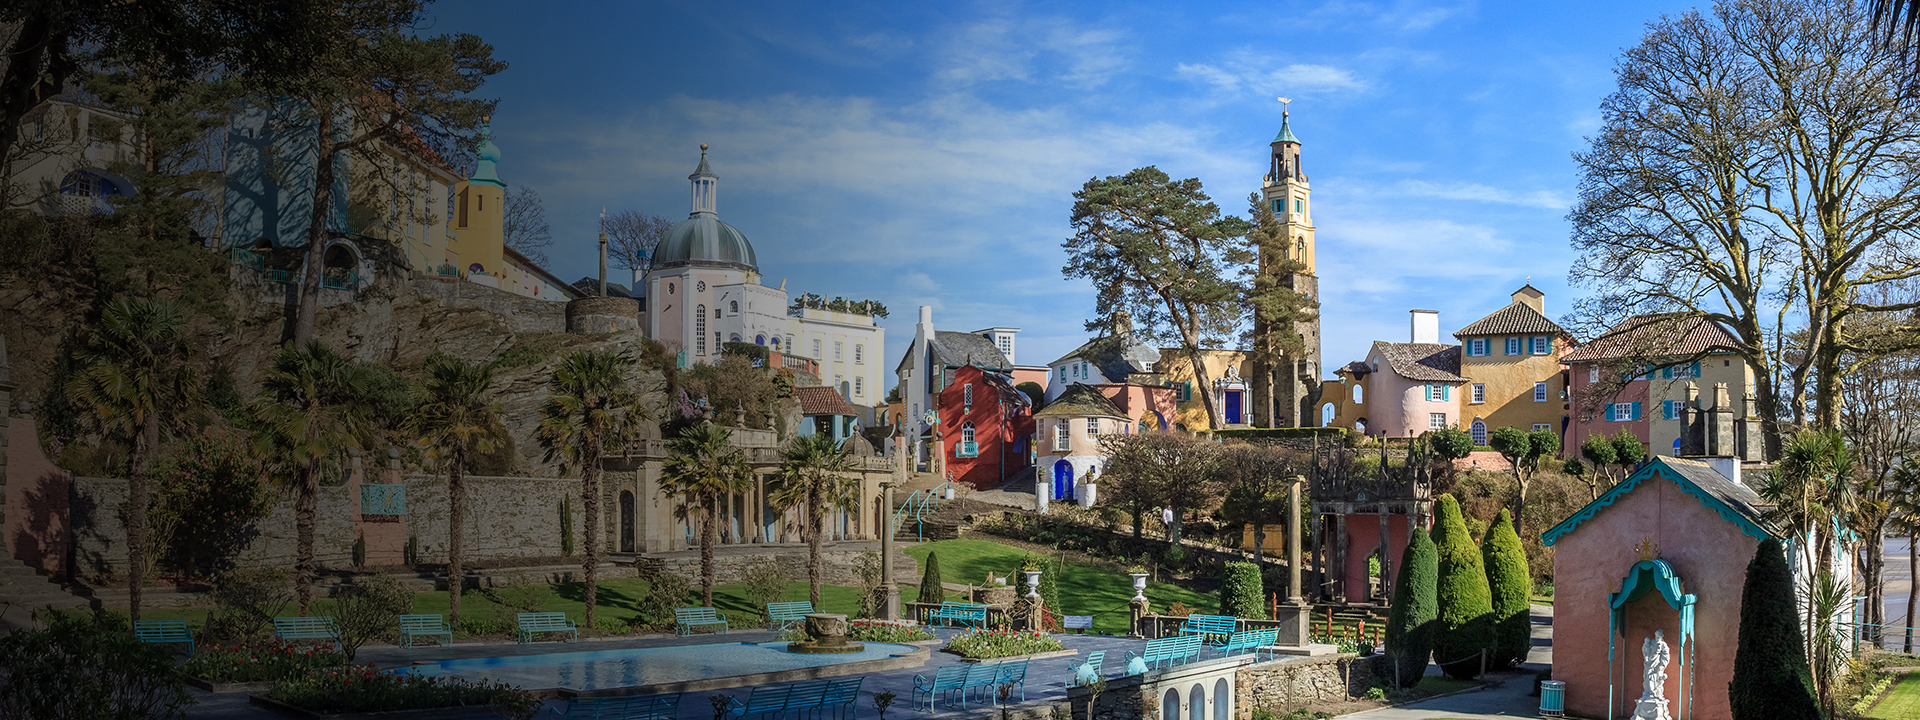 Image of Portmeirion, Wales